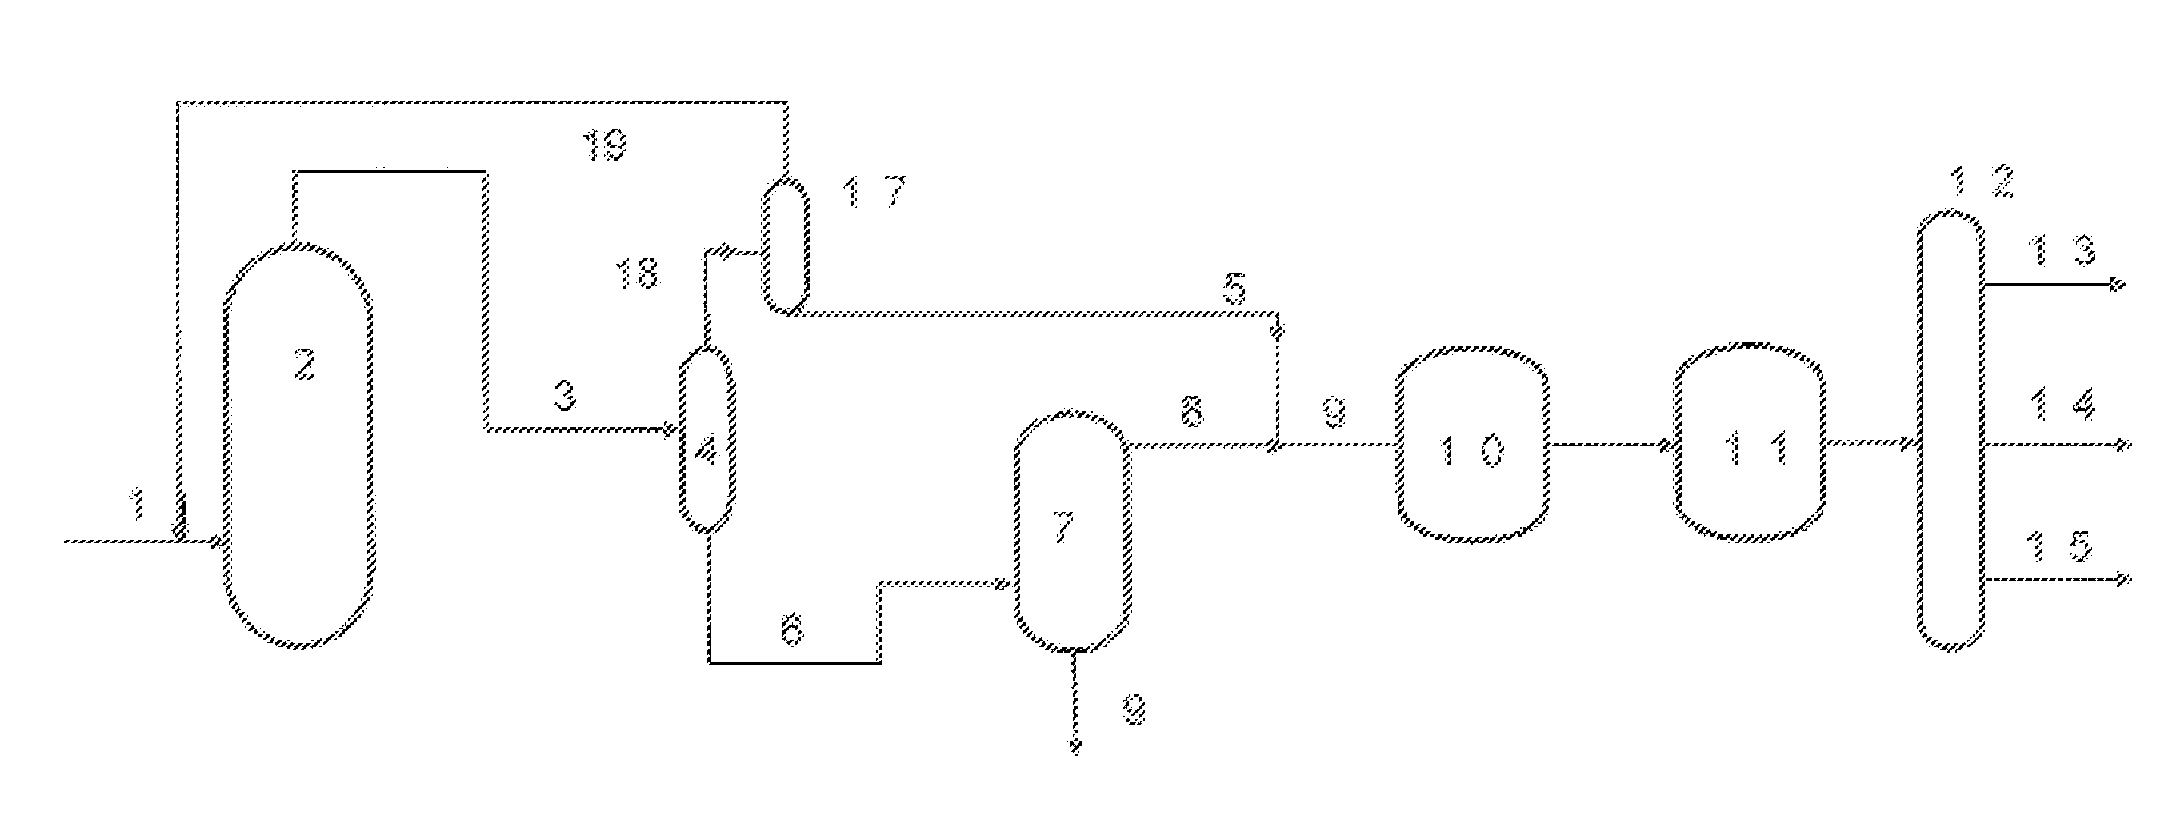 Residue conversion process that includes a deasphalting stage and a hydroconversion stage